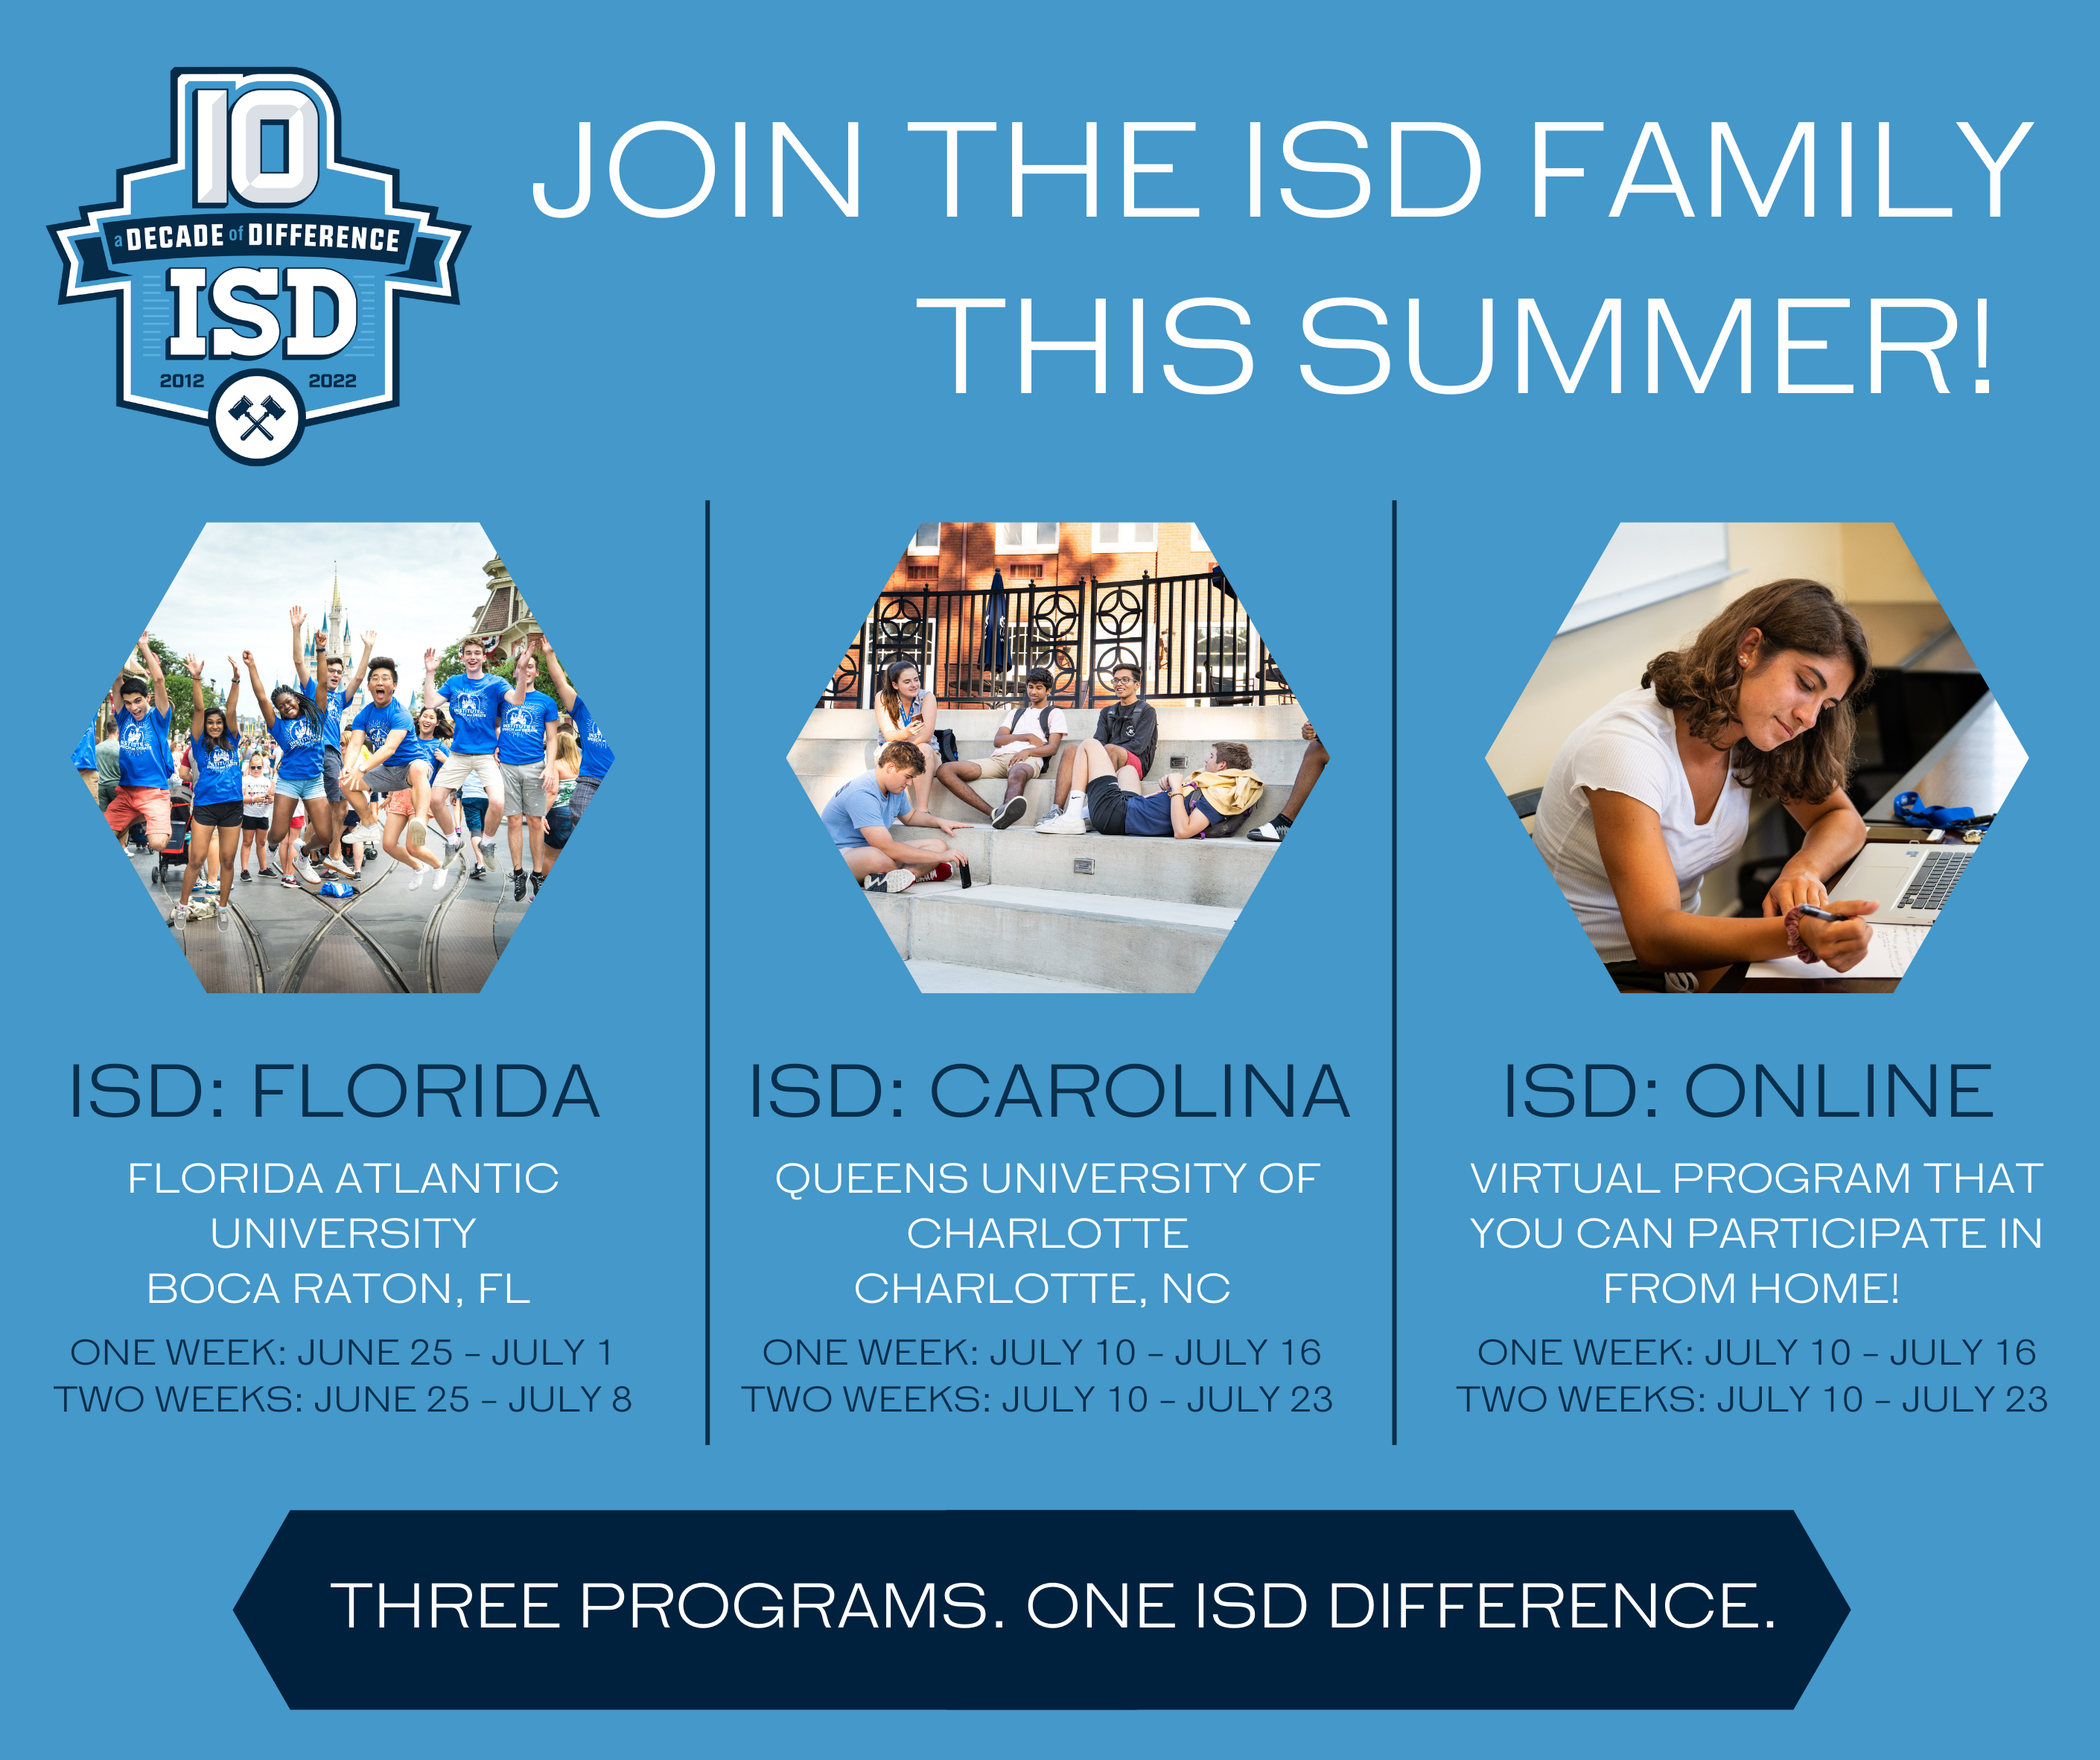 Three columns that give information for ISD's 3 2022 sessions: ISD: Florida, ISD: Carolina, and ISD: Online.